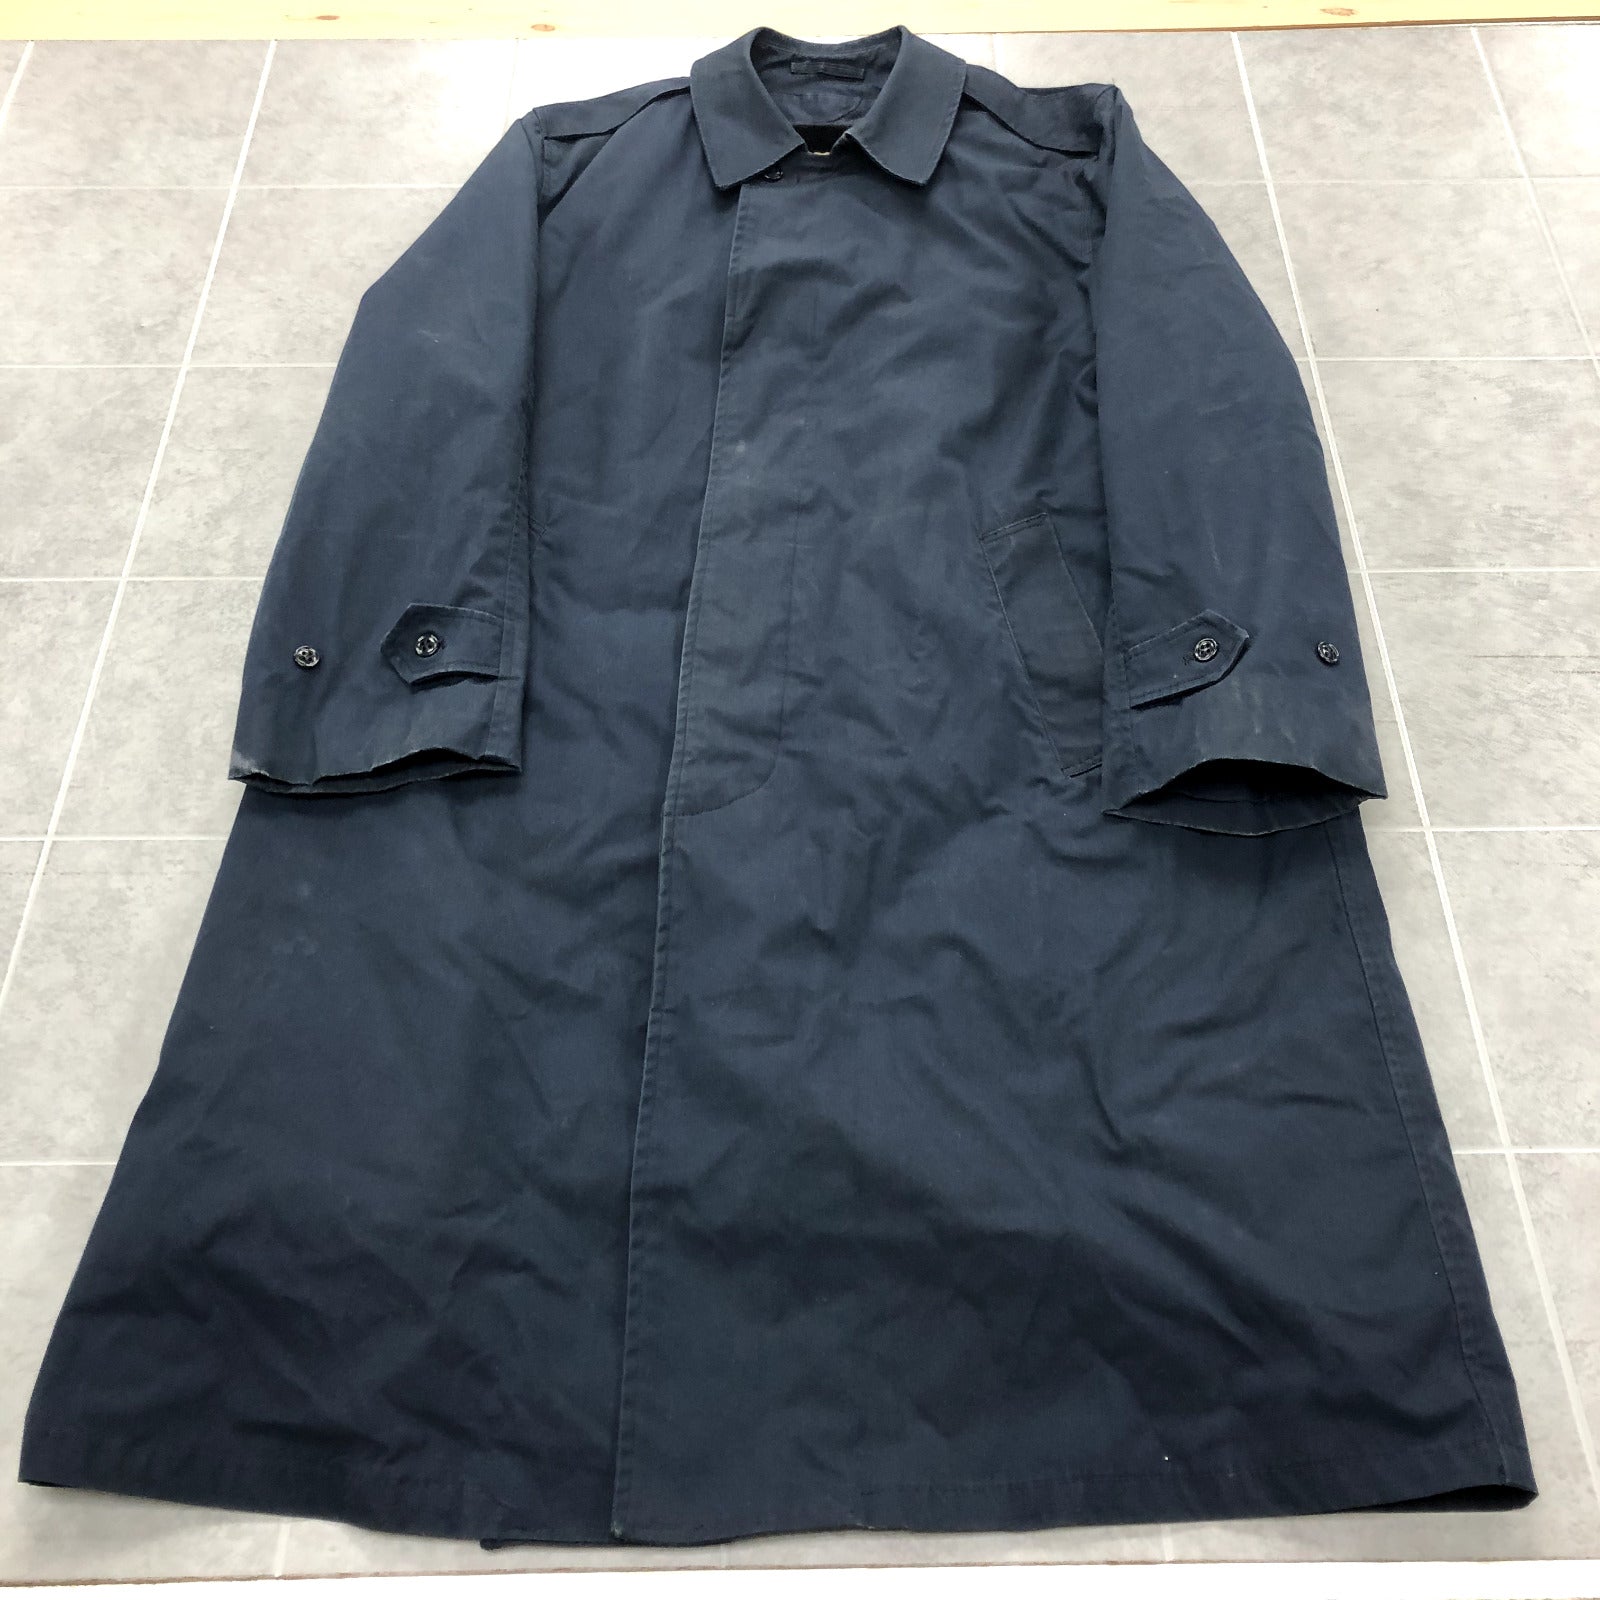 Vintage US Military Navy Long Sleeve Button Up Lined Trench Coat Adult Size 42L